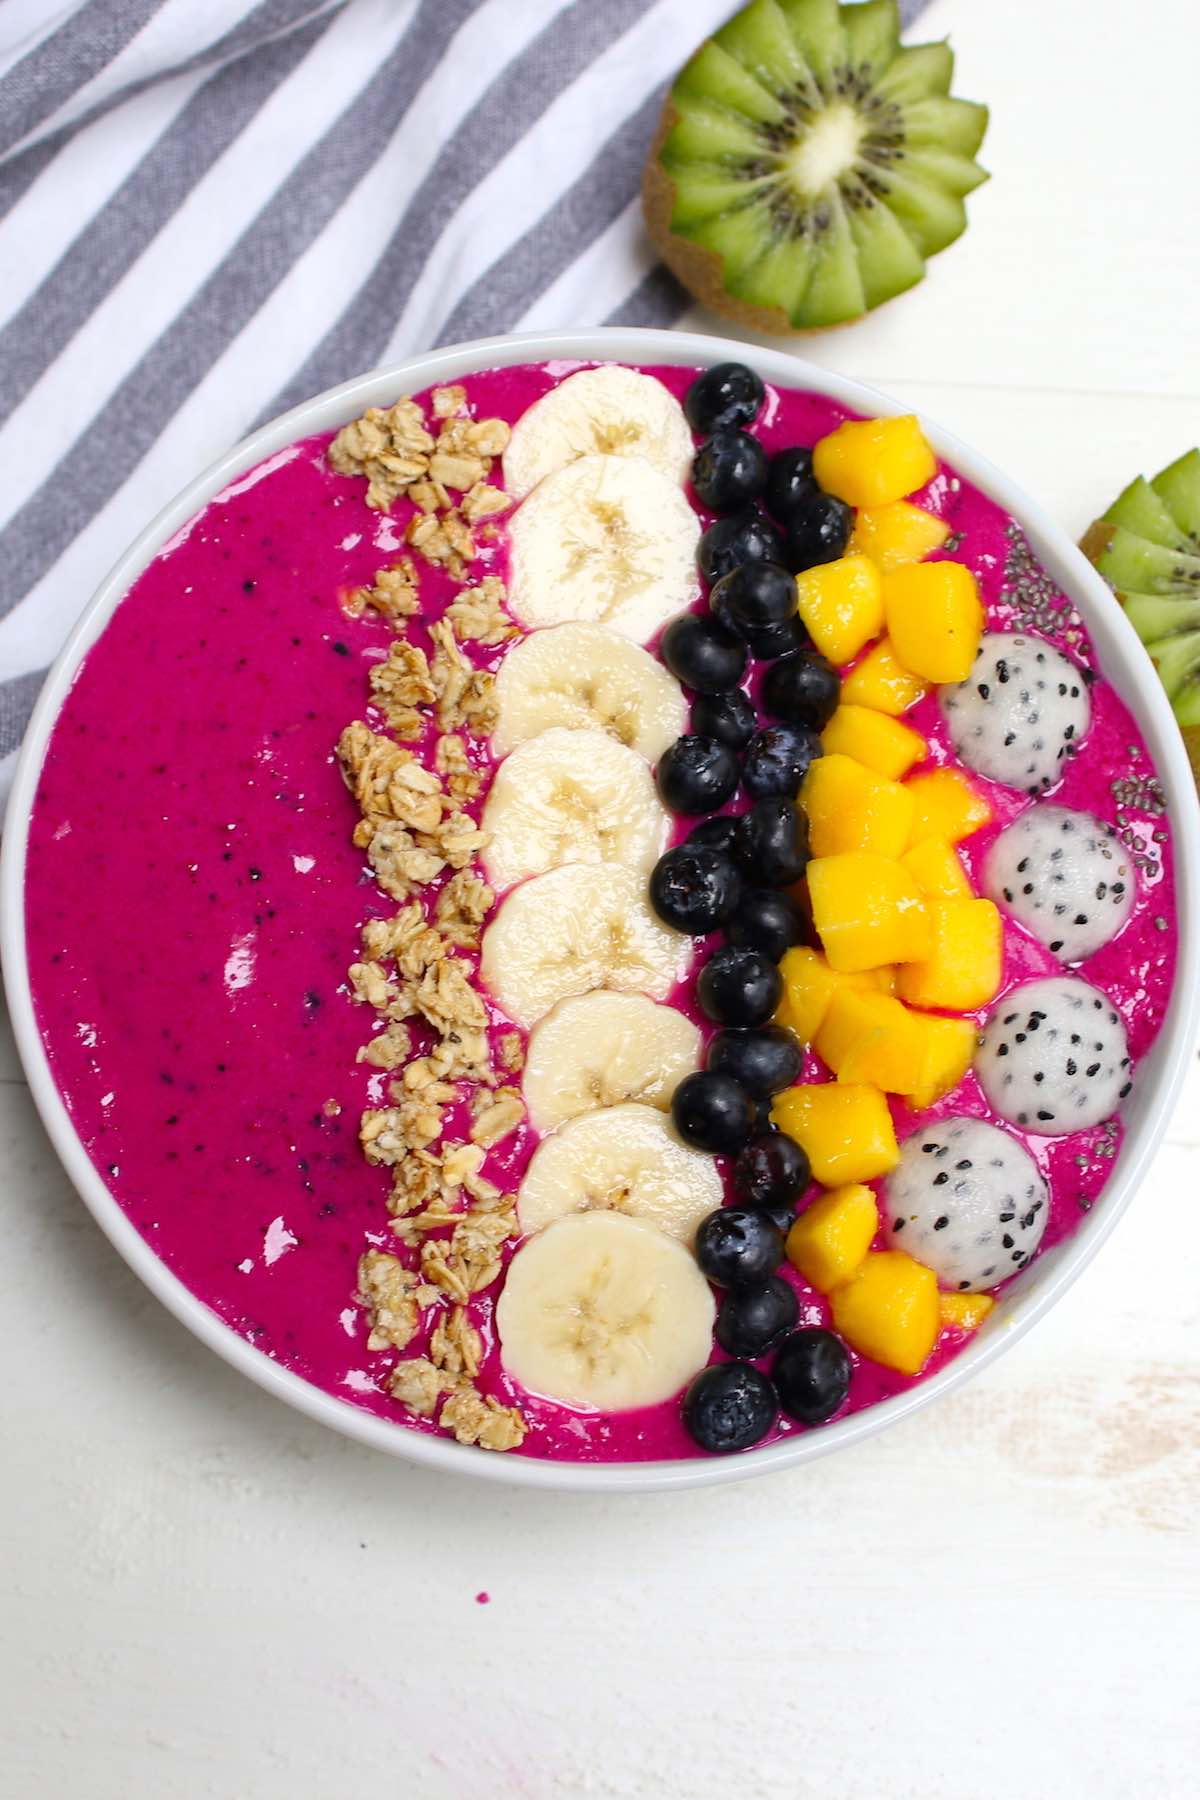 A beautiful pitaya bowl made with frozen dragon fruit, fresh bananas and almond milk with toppings including fresh mango, banana, granola and blueberries